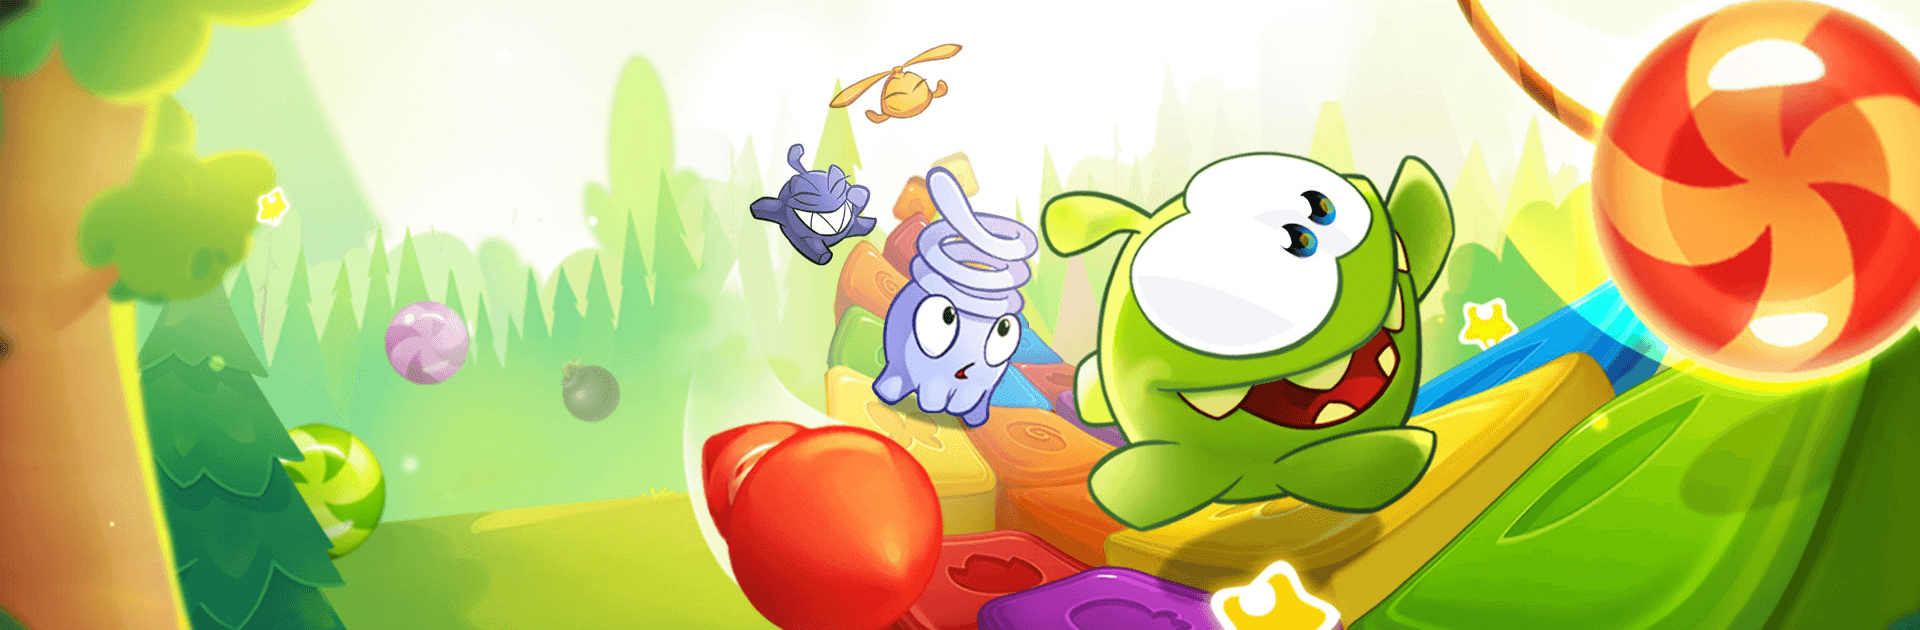 Cut The Rope 2 - Game for Mac, Windows (PC), Linux - WebCatalog